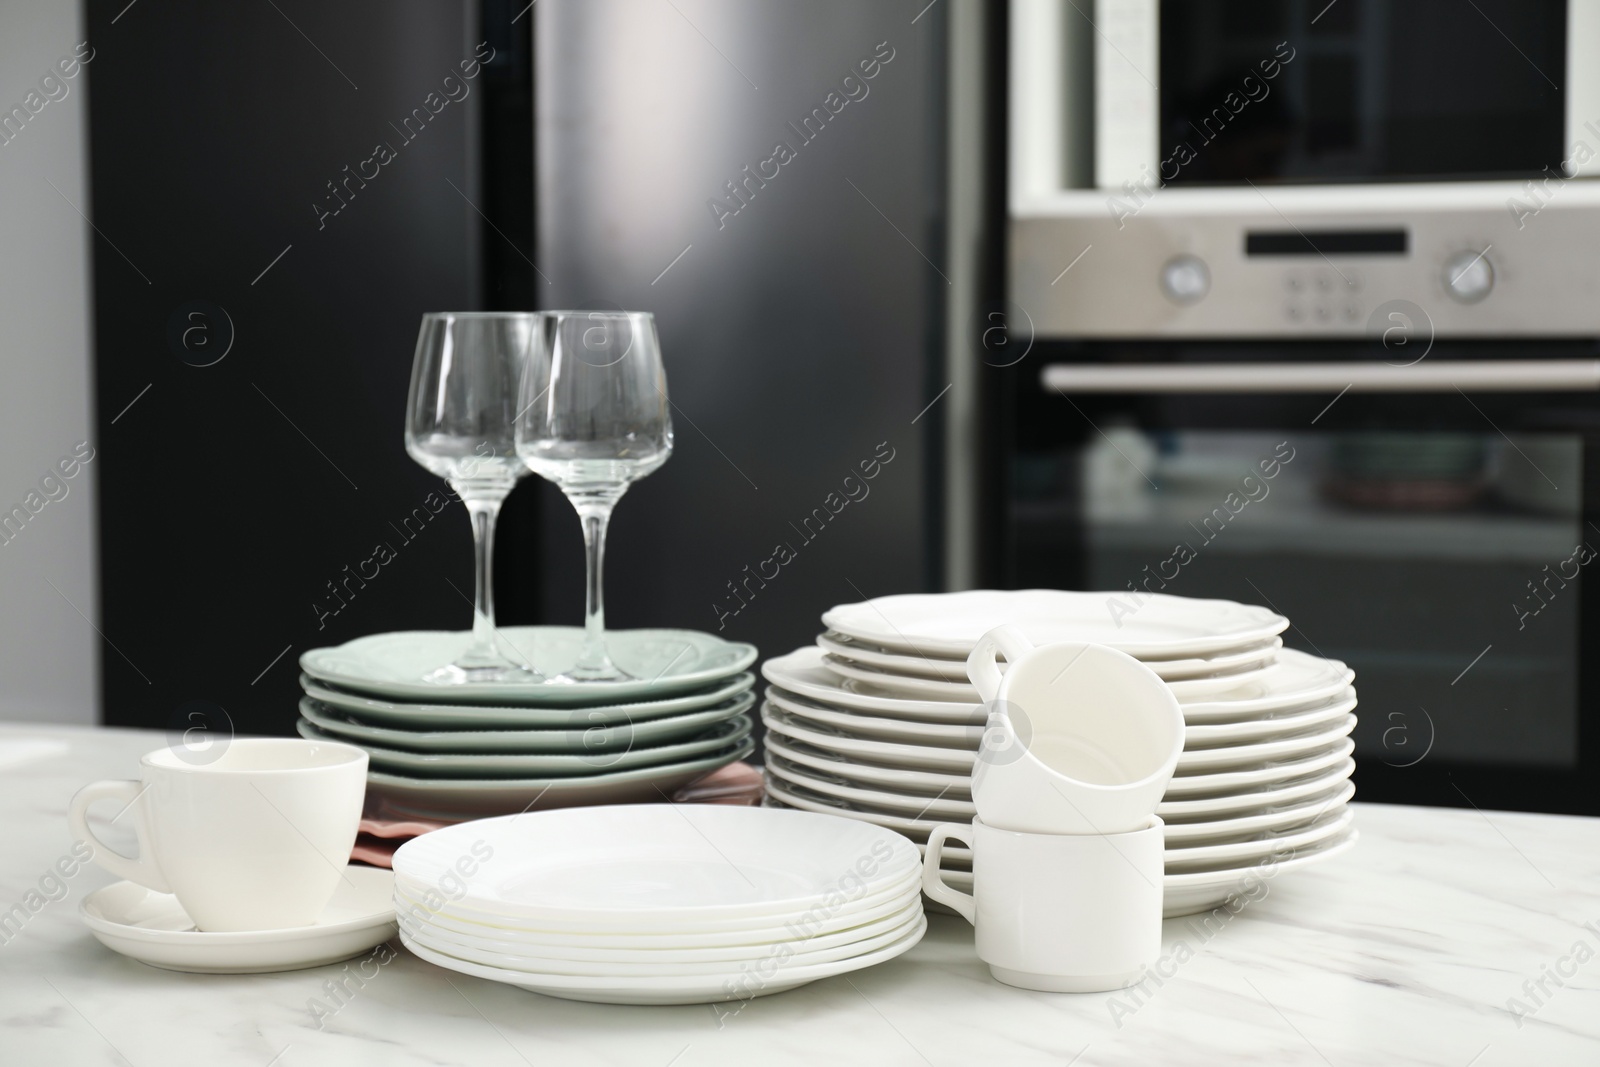 Photo of Clean plates, cups and glasses on white marble table in kitchen